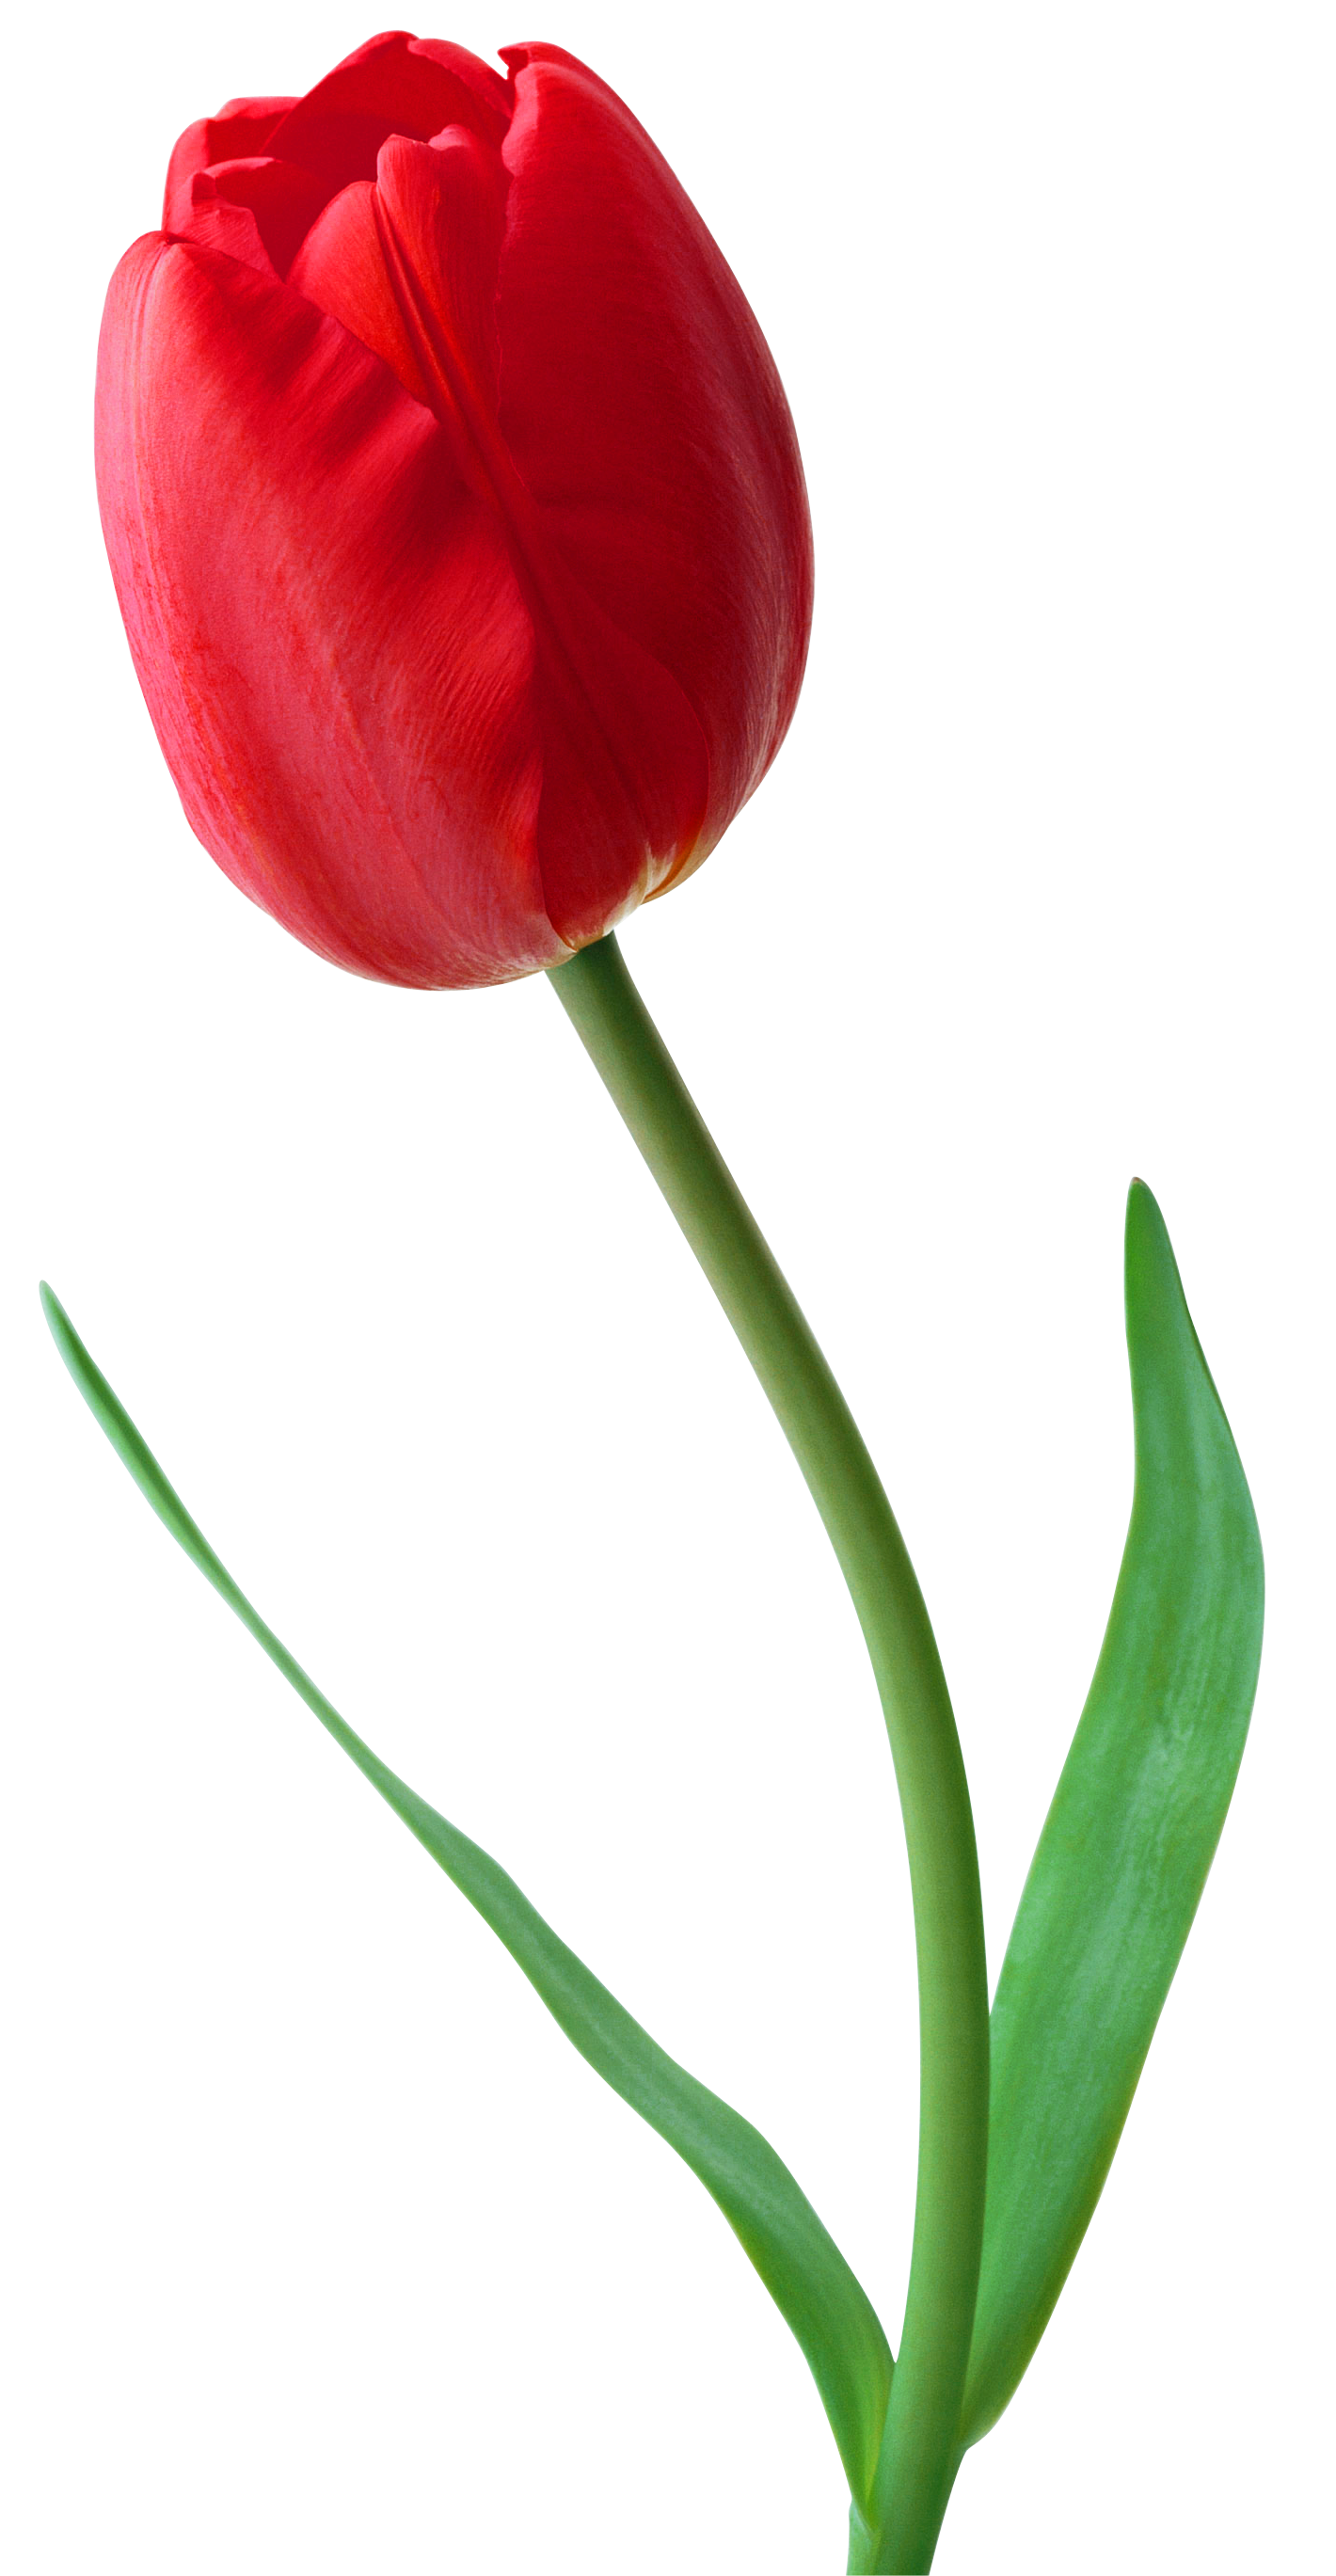 Pin by lyna aryati on Flower Tulip.. | Pinterest | Red tulips and Tattoo